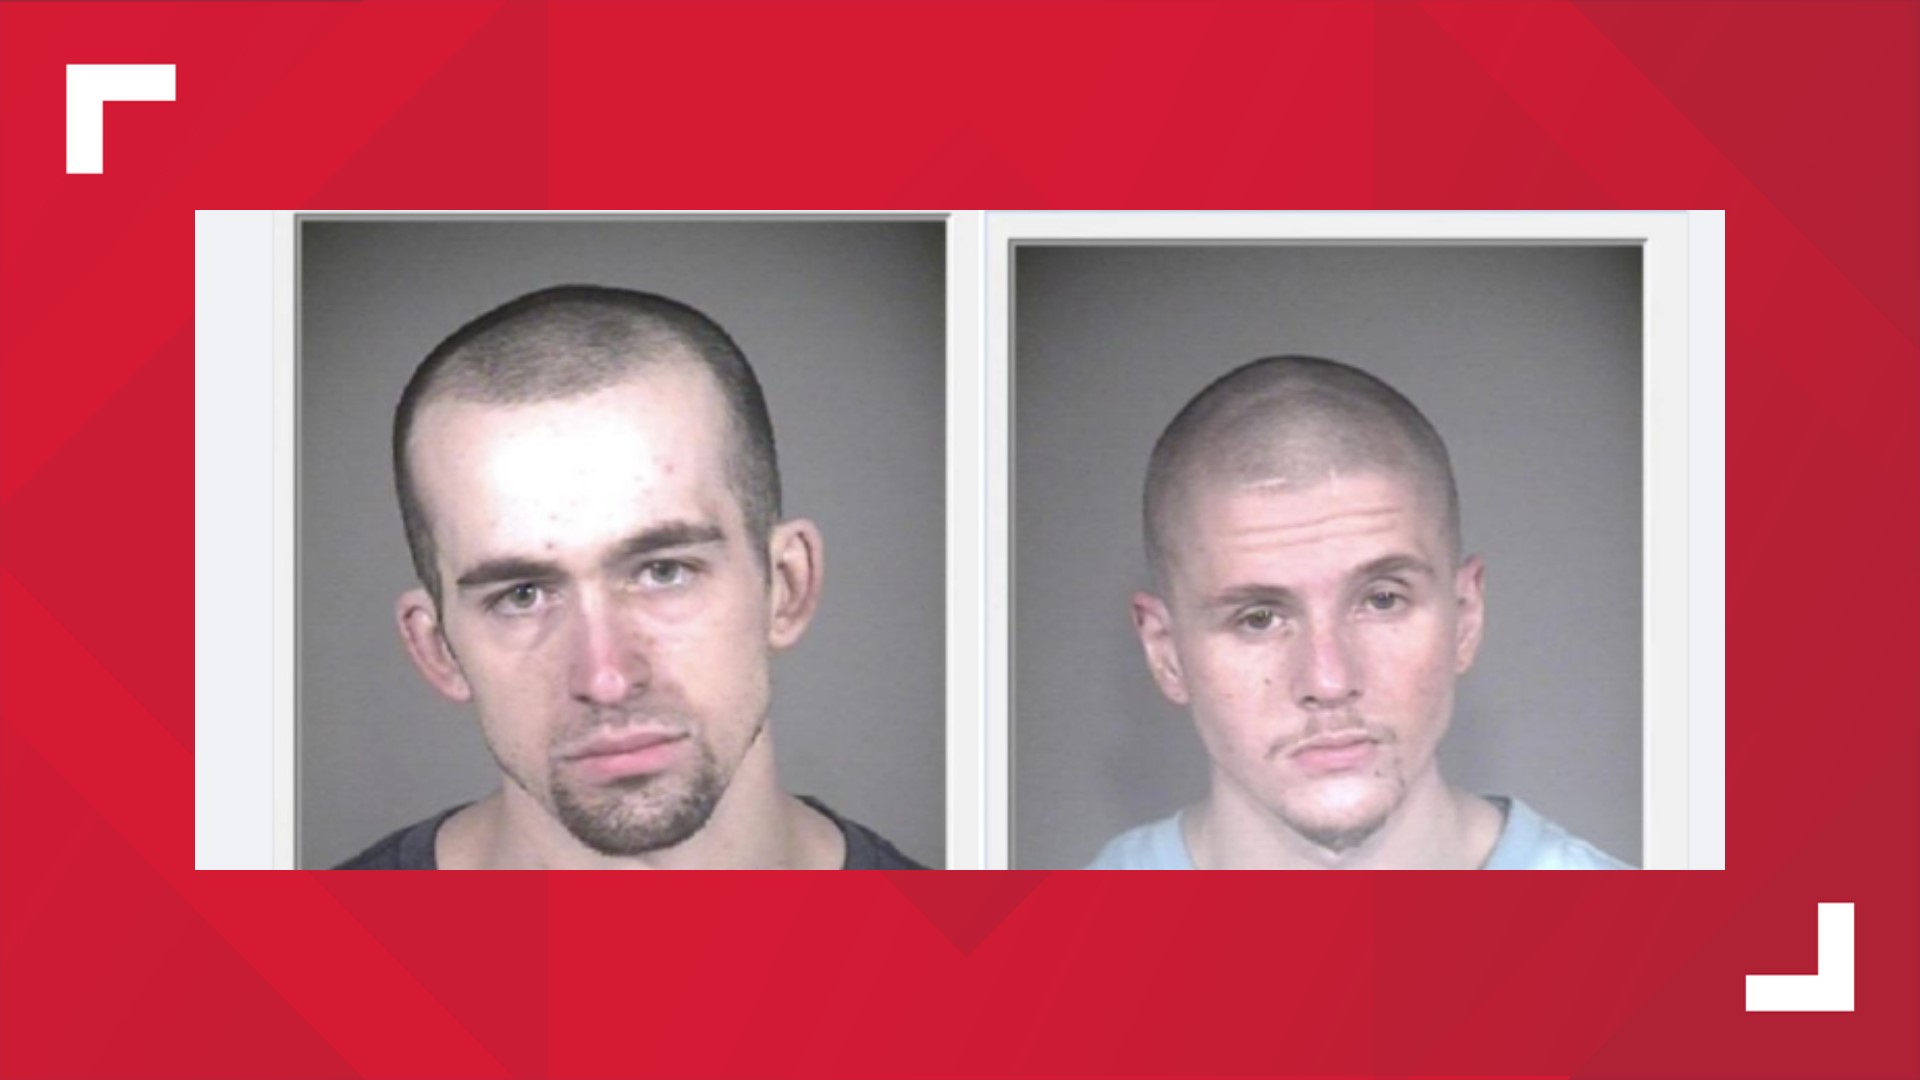 KSCO is searching for 29-year-old Caleb Sloan and 26-year-old Aksel Strom. Both suspects are considered to be armed and dangerous.